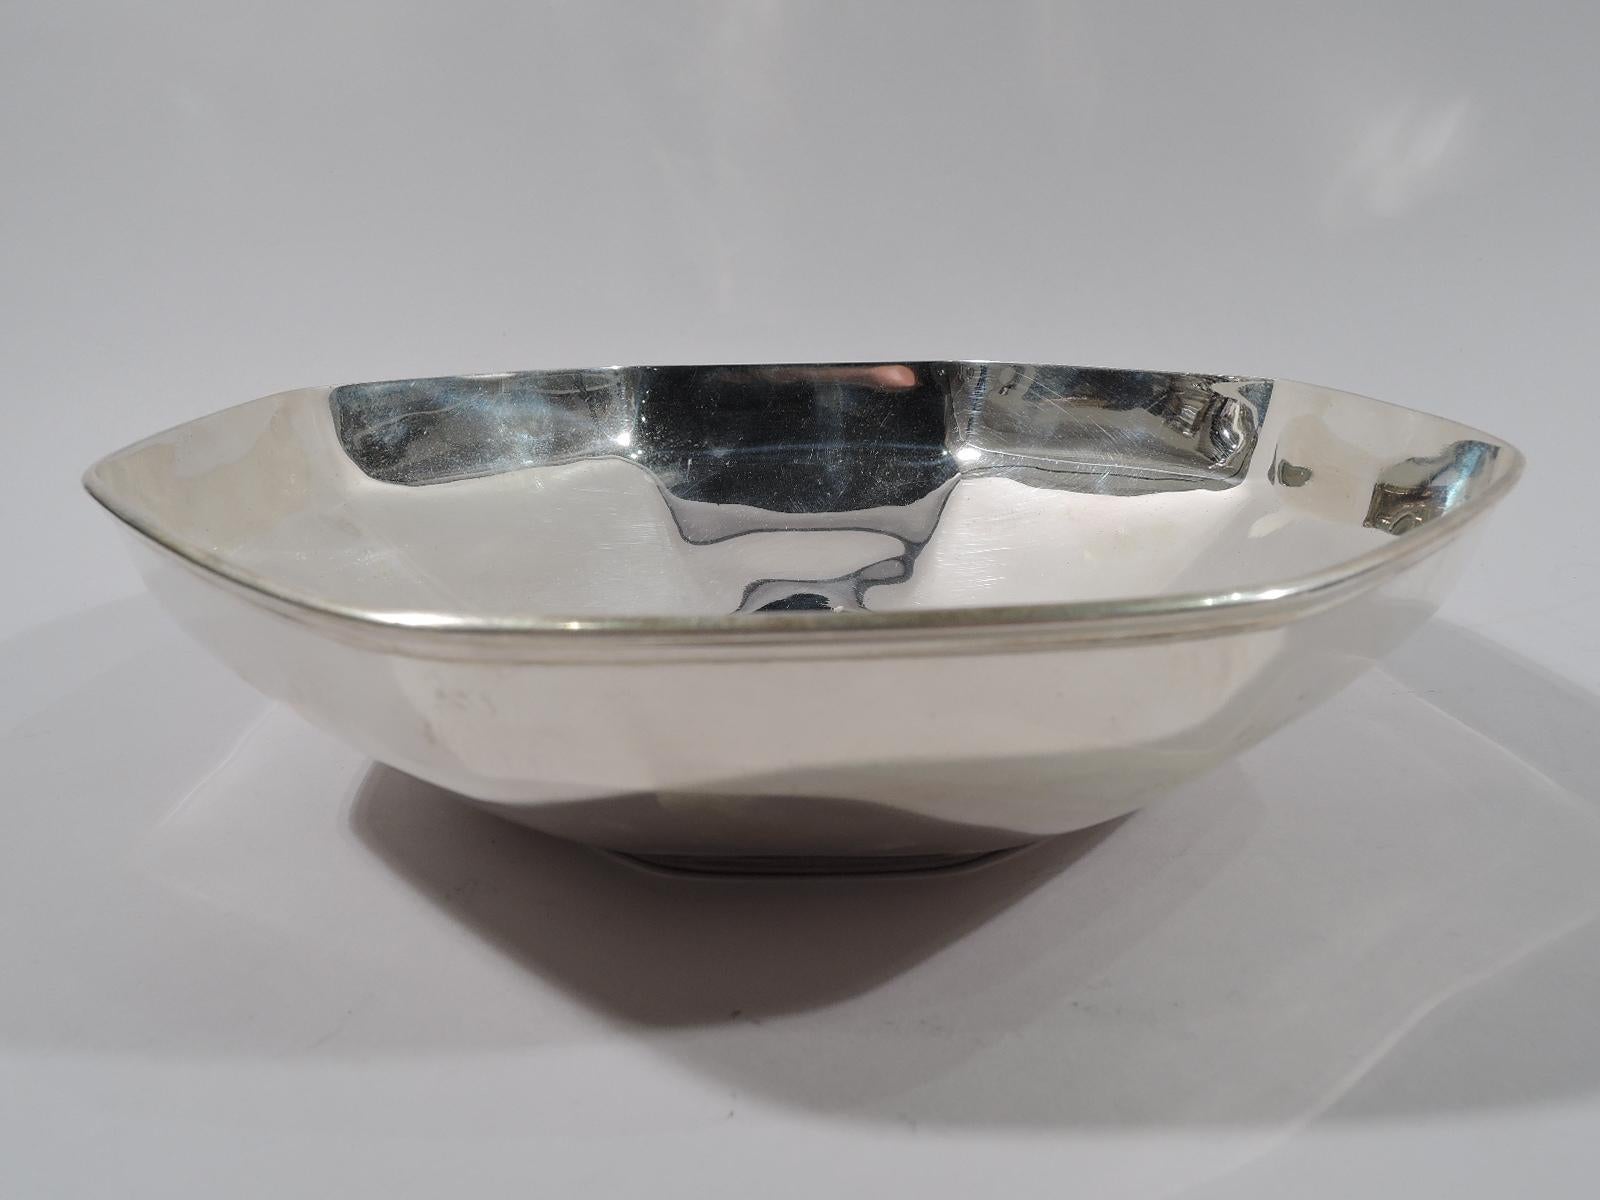 Art Deco sterling silver bowl. Made by Tiffany & Co., circa 1923. Octagonal with curved and tapering sides, and molded rim. A softened version of the geometric style. Fully marked including pattern no. 20200 (first produced in 1923) and director's